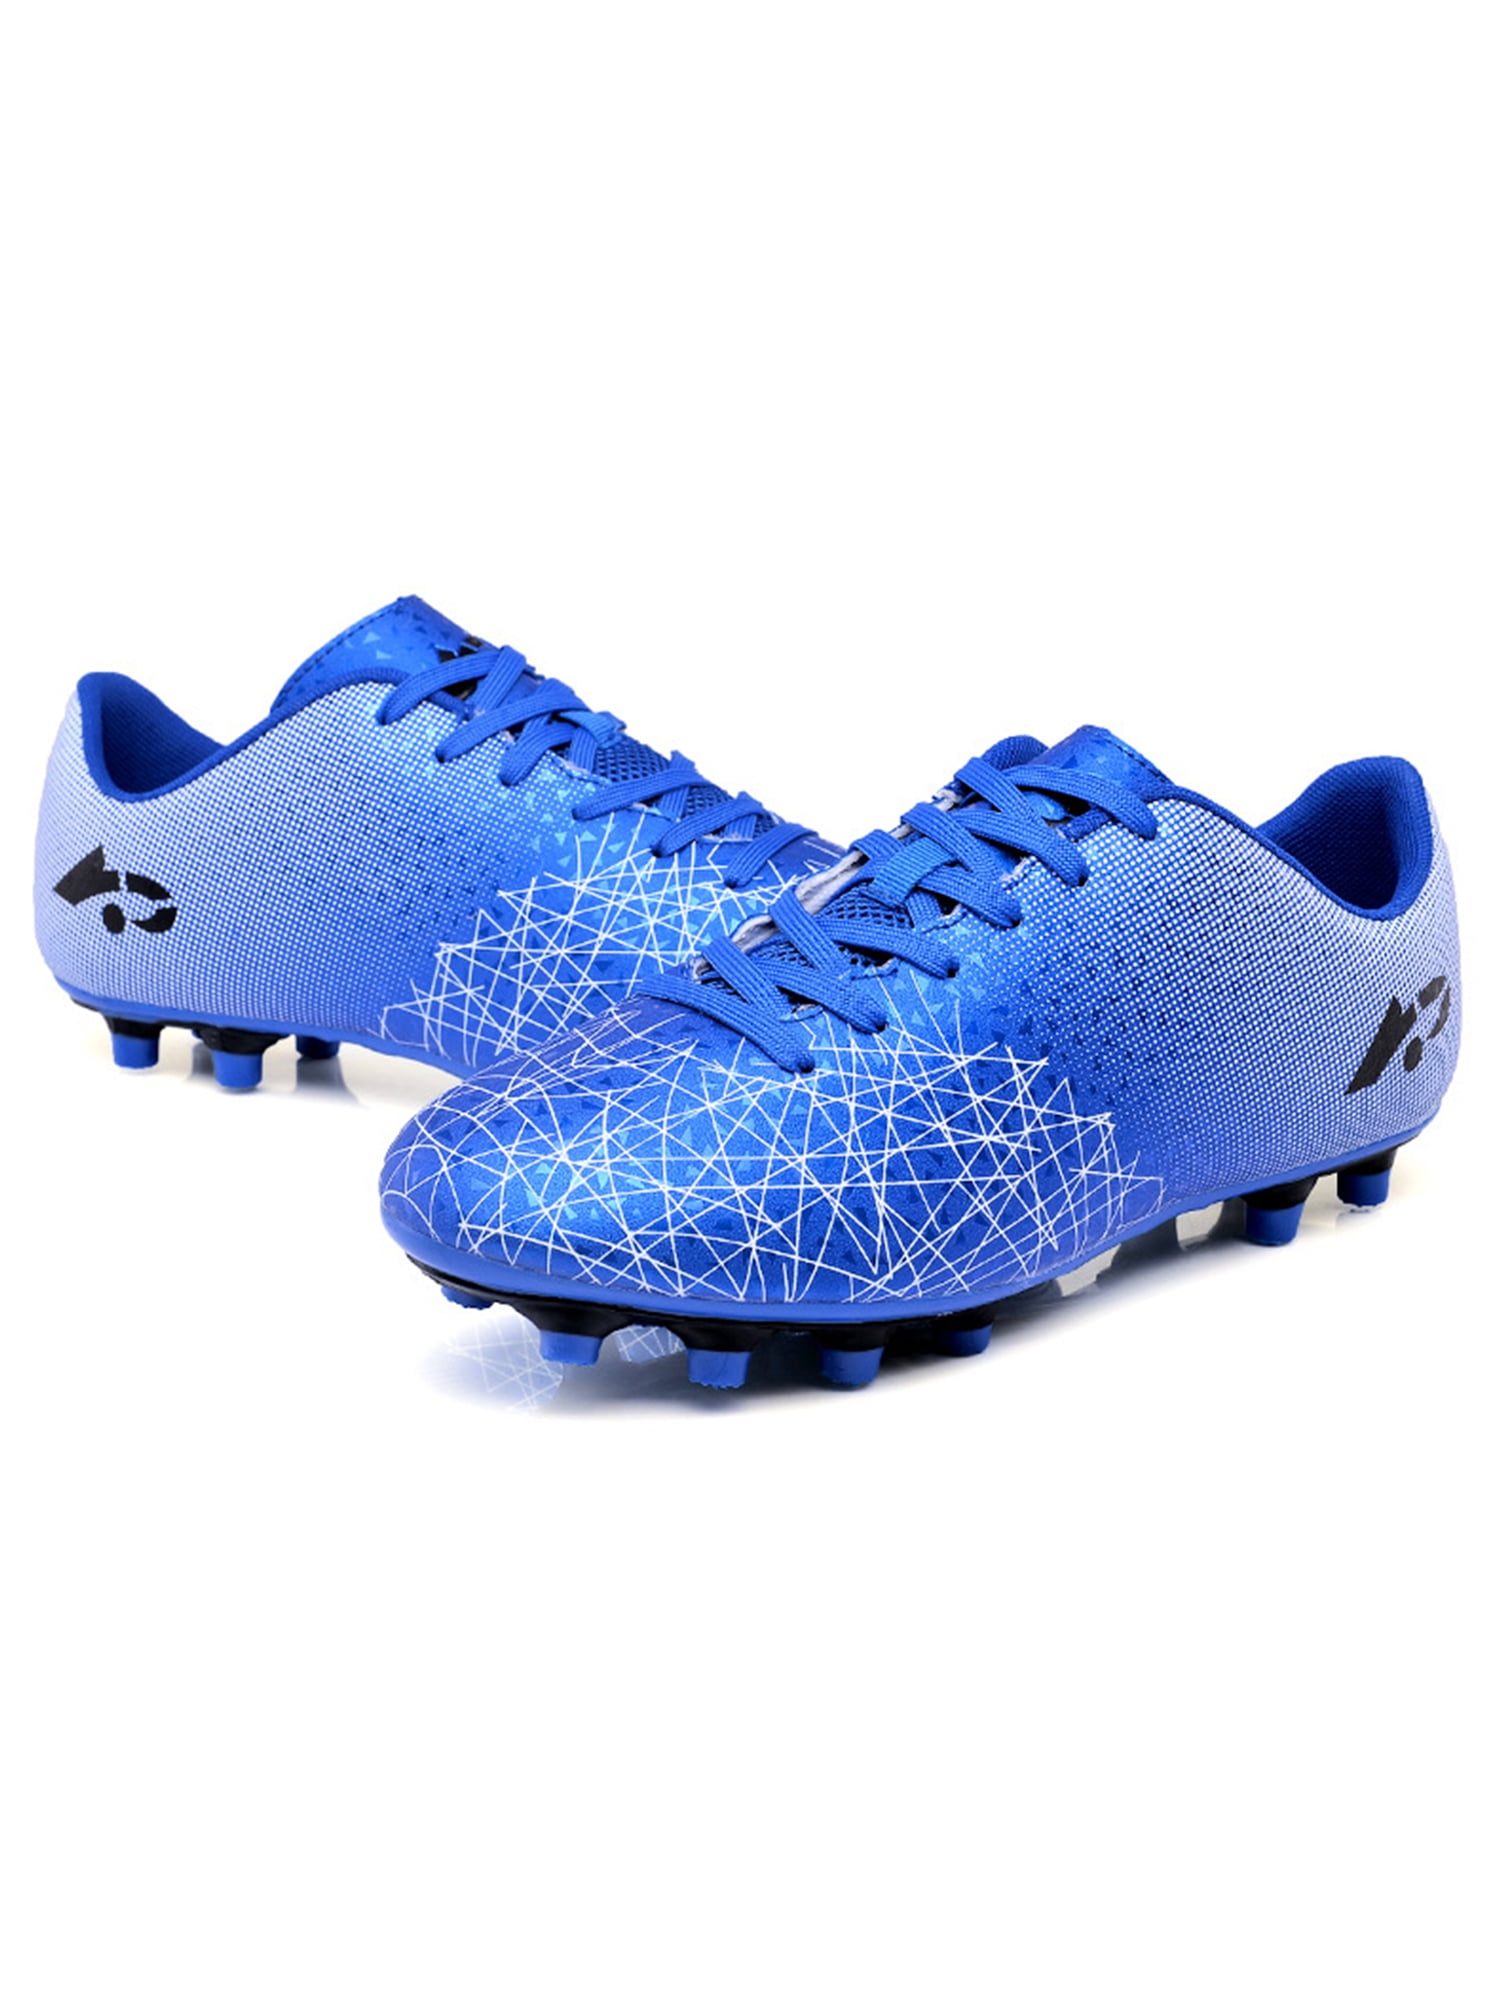 JABASIC Kids Soccer Boots Boys Girls Athletic Outdoor Football Cleats Shoes 